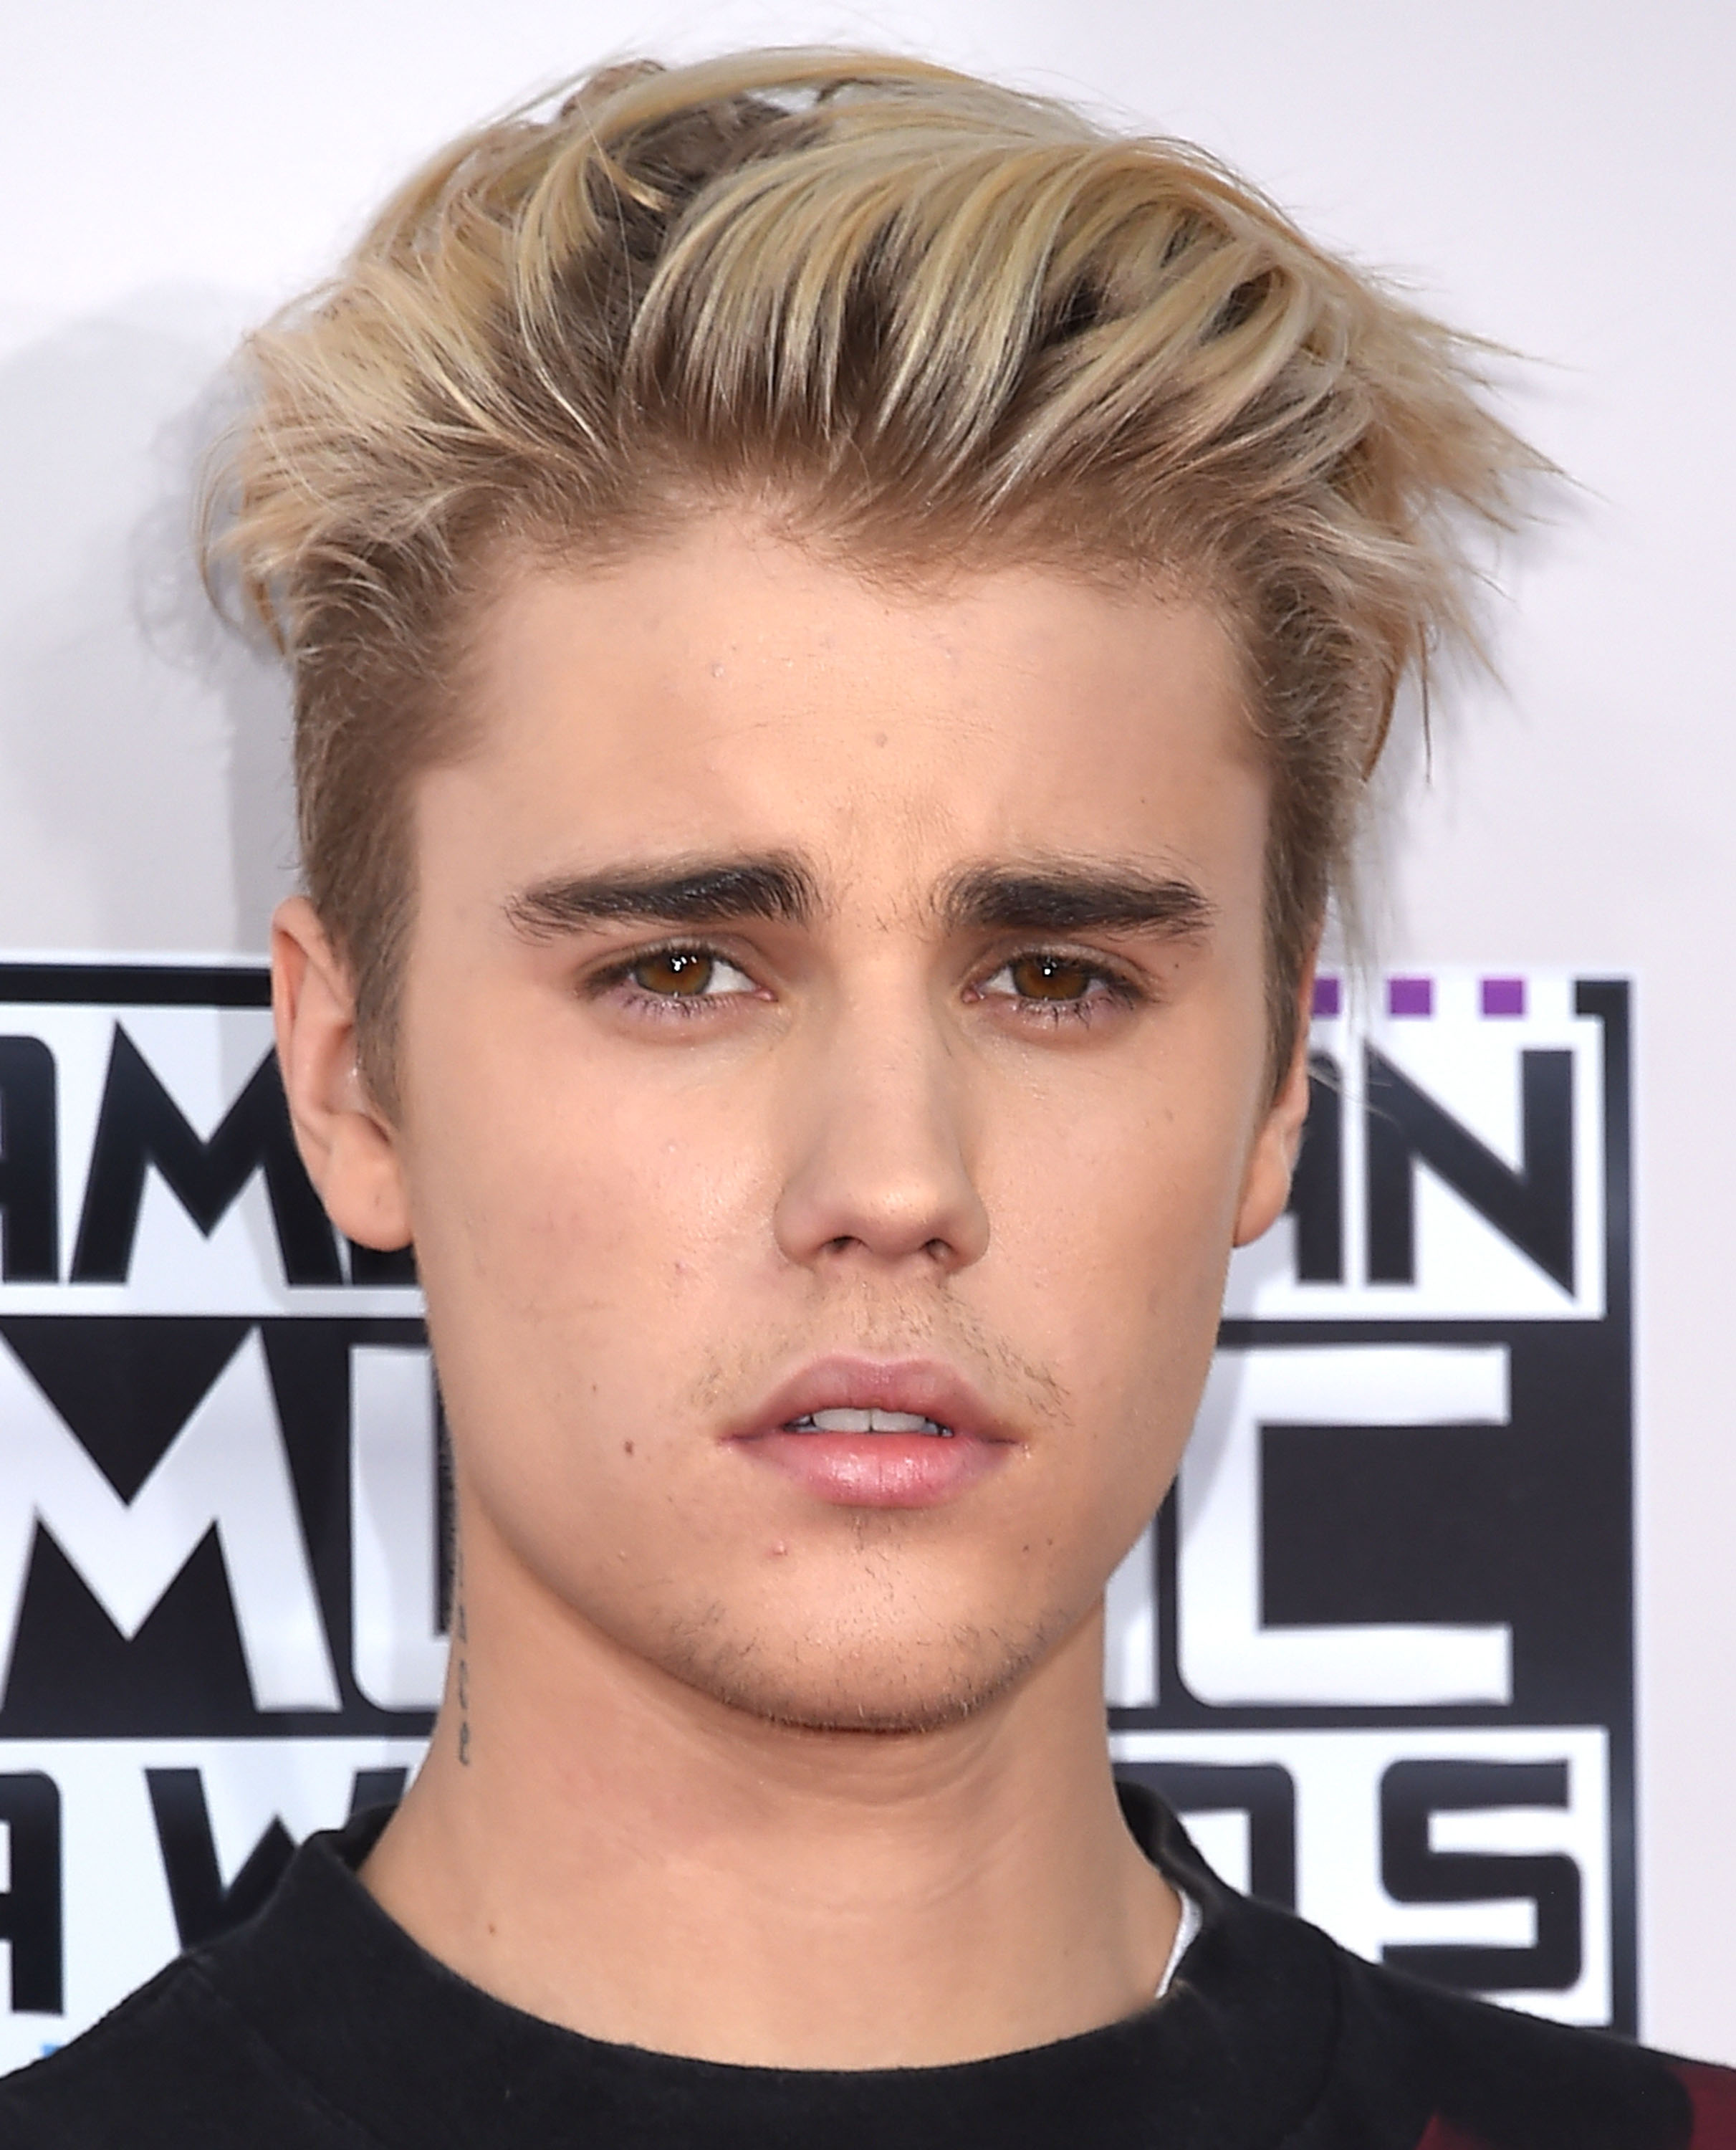 Blond Hair Is Back  As Justin Biebers New Hairstyle Sets The Standard   Gay Nation